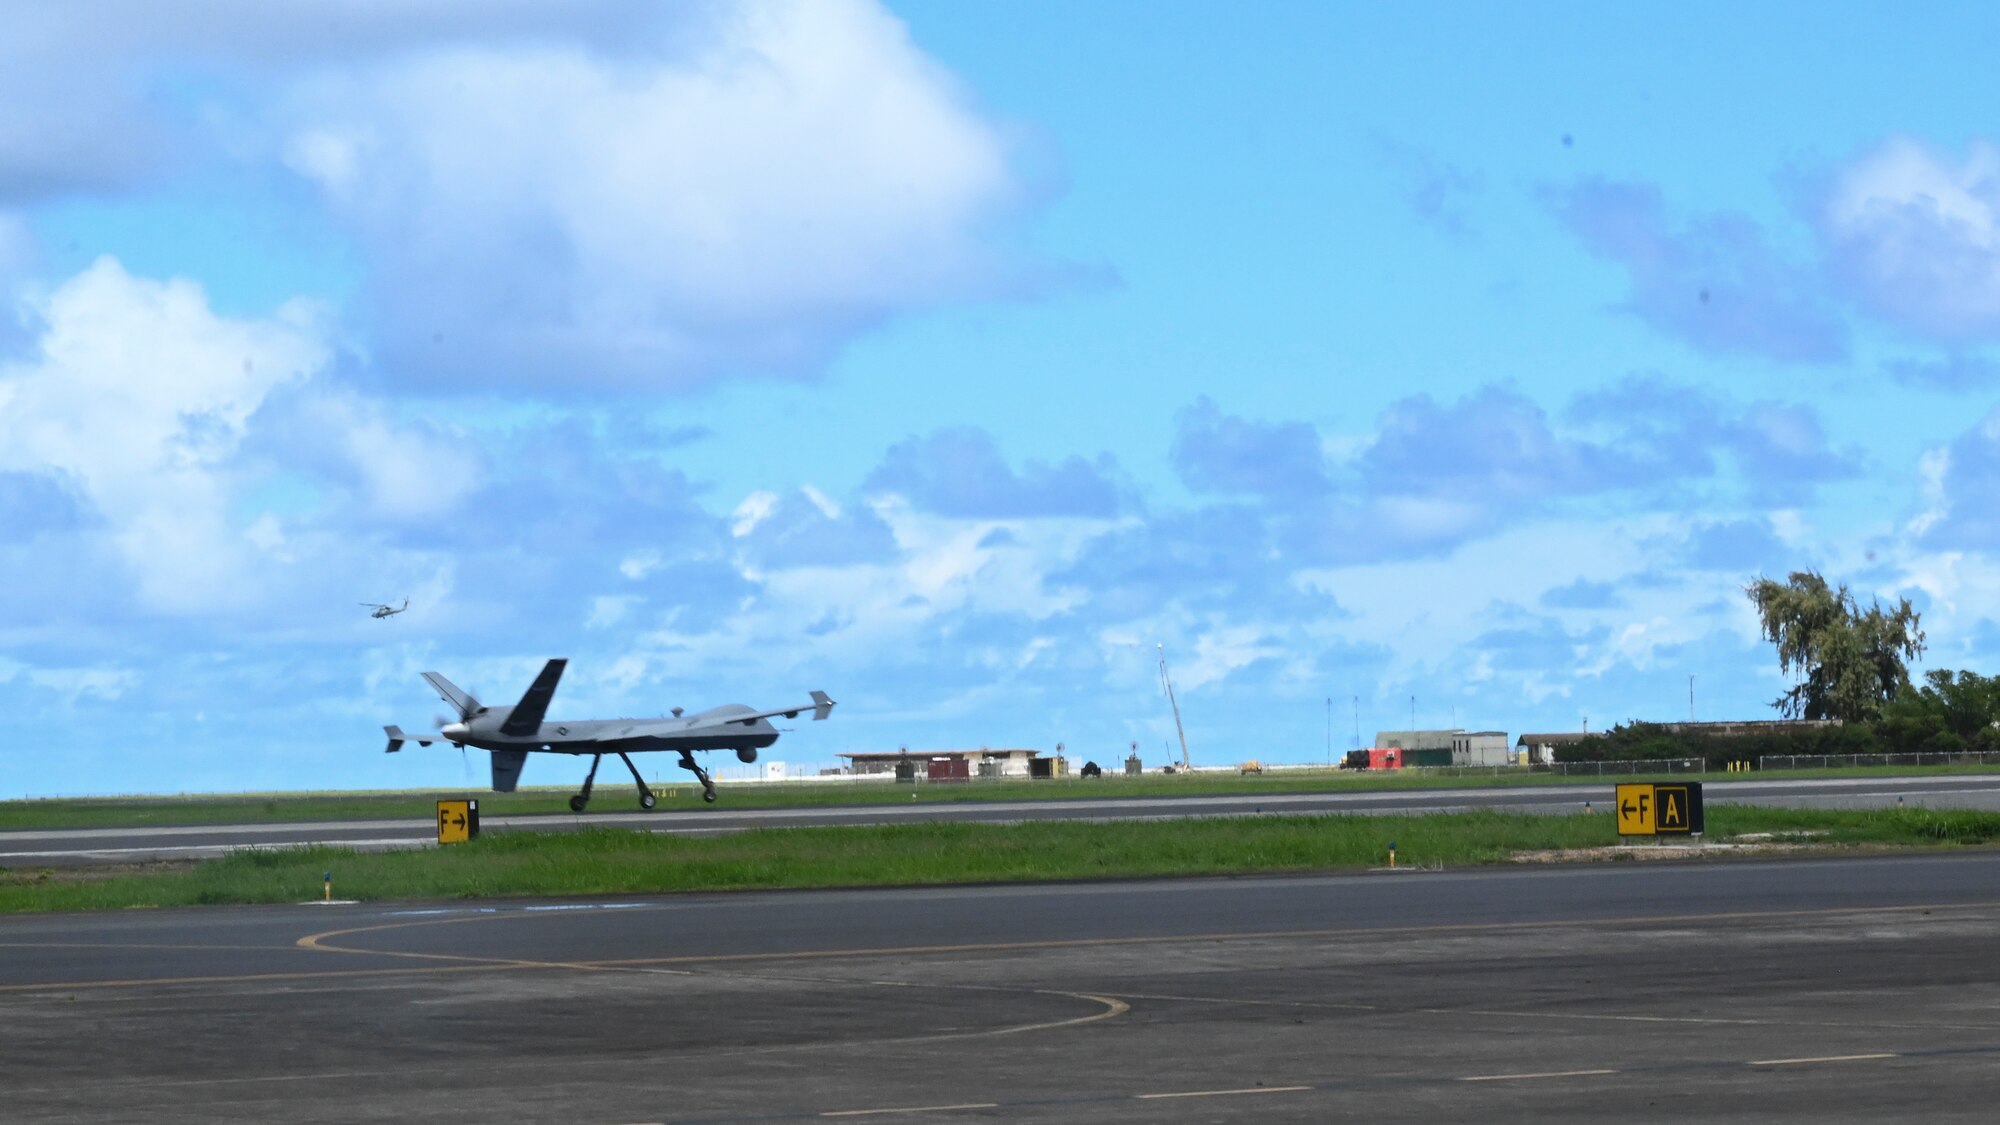 An MQ-9 Reaper takes off for the first sortie flight of Exercise Agile Combat Employment Reaper Sept. 15, 2021, on Marine Corps Base Hawaii. The purpose of this exercise is to demonstrate the MQ-9 assets and the ability to rapidly mobilize and integrate across multiple domains. (U.S. Air Force photo by Airman 1st Class Adrian Salazar)